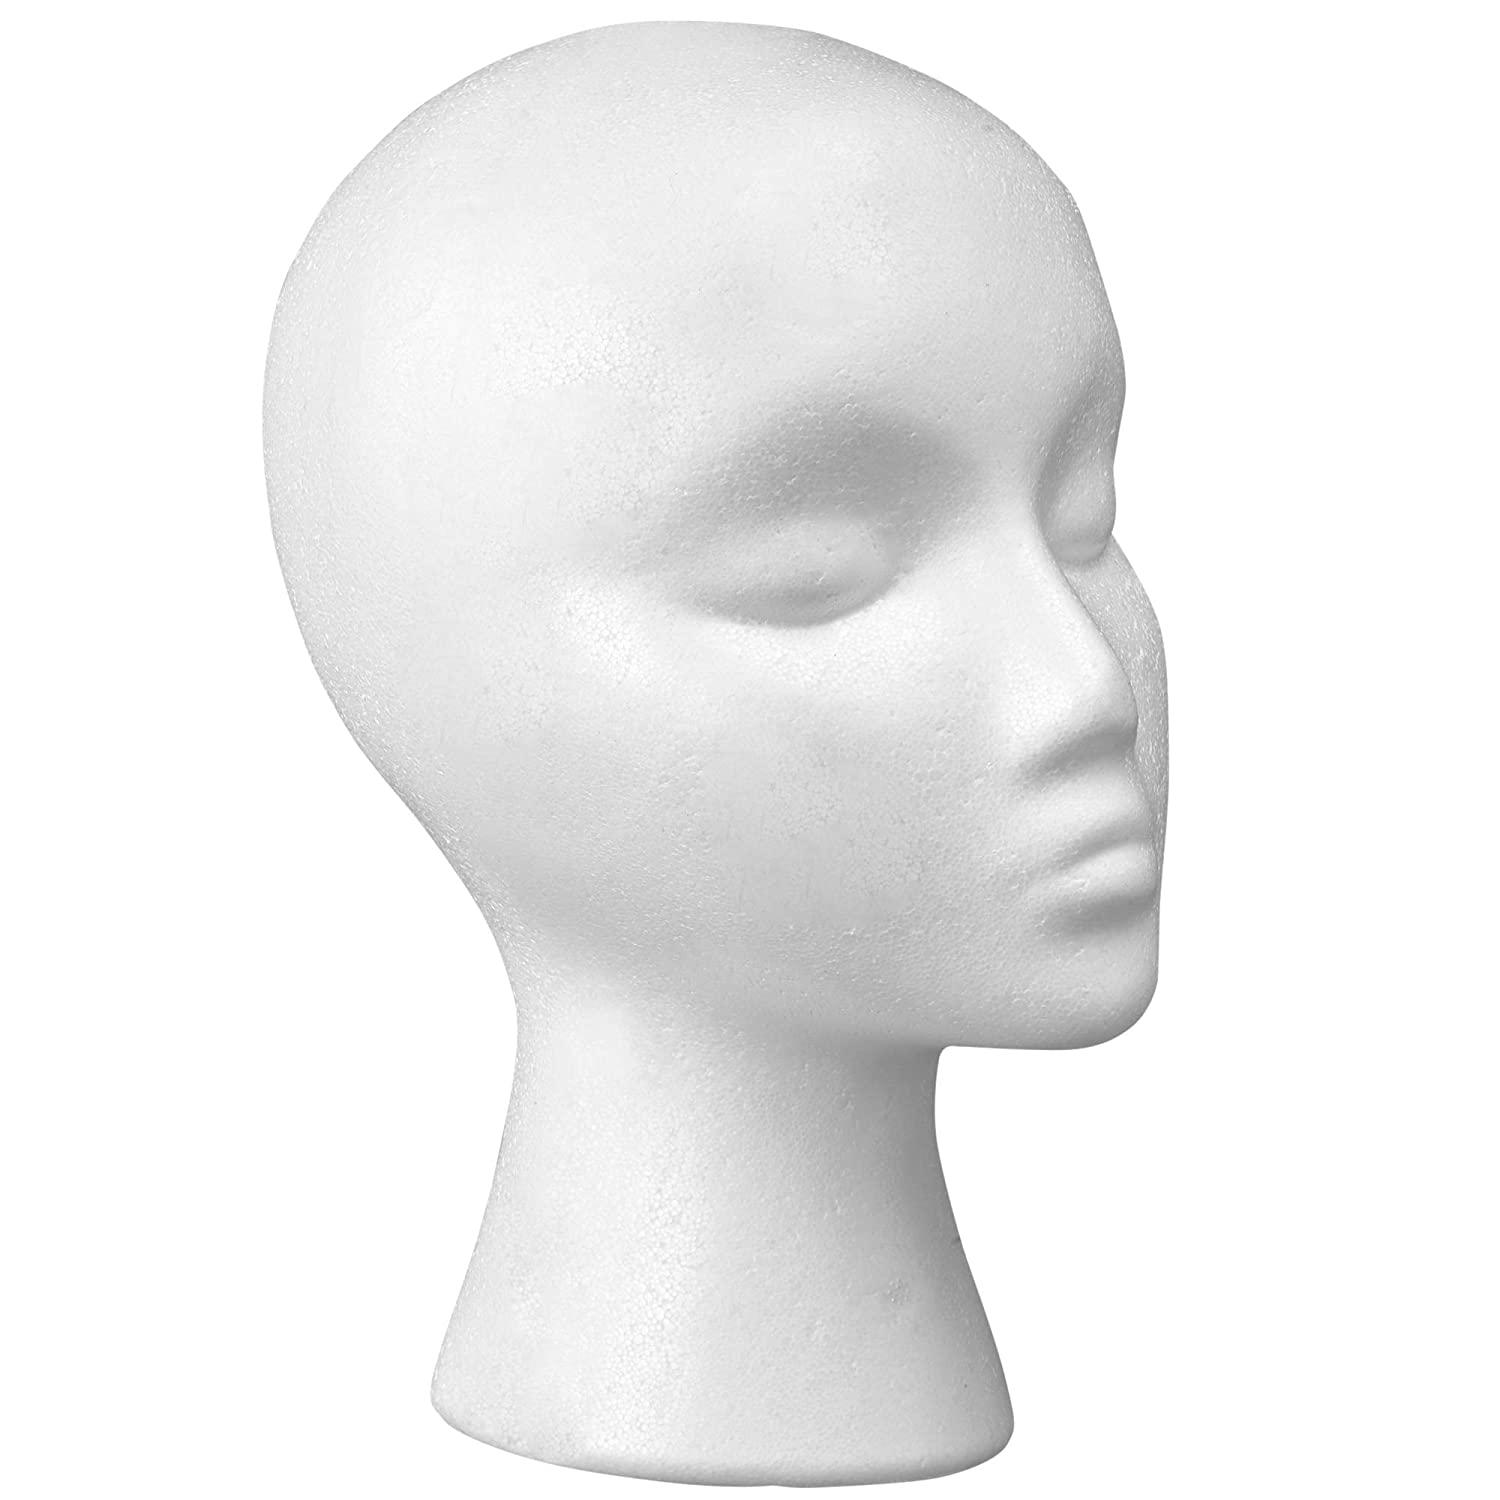 2PACK- OLé Designs Female Foam Mannequin Head Wig Stand, Stable Round  Base-White, Styrofoam Manikin Head Hats Holder and Headband Display -  Realistic